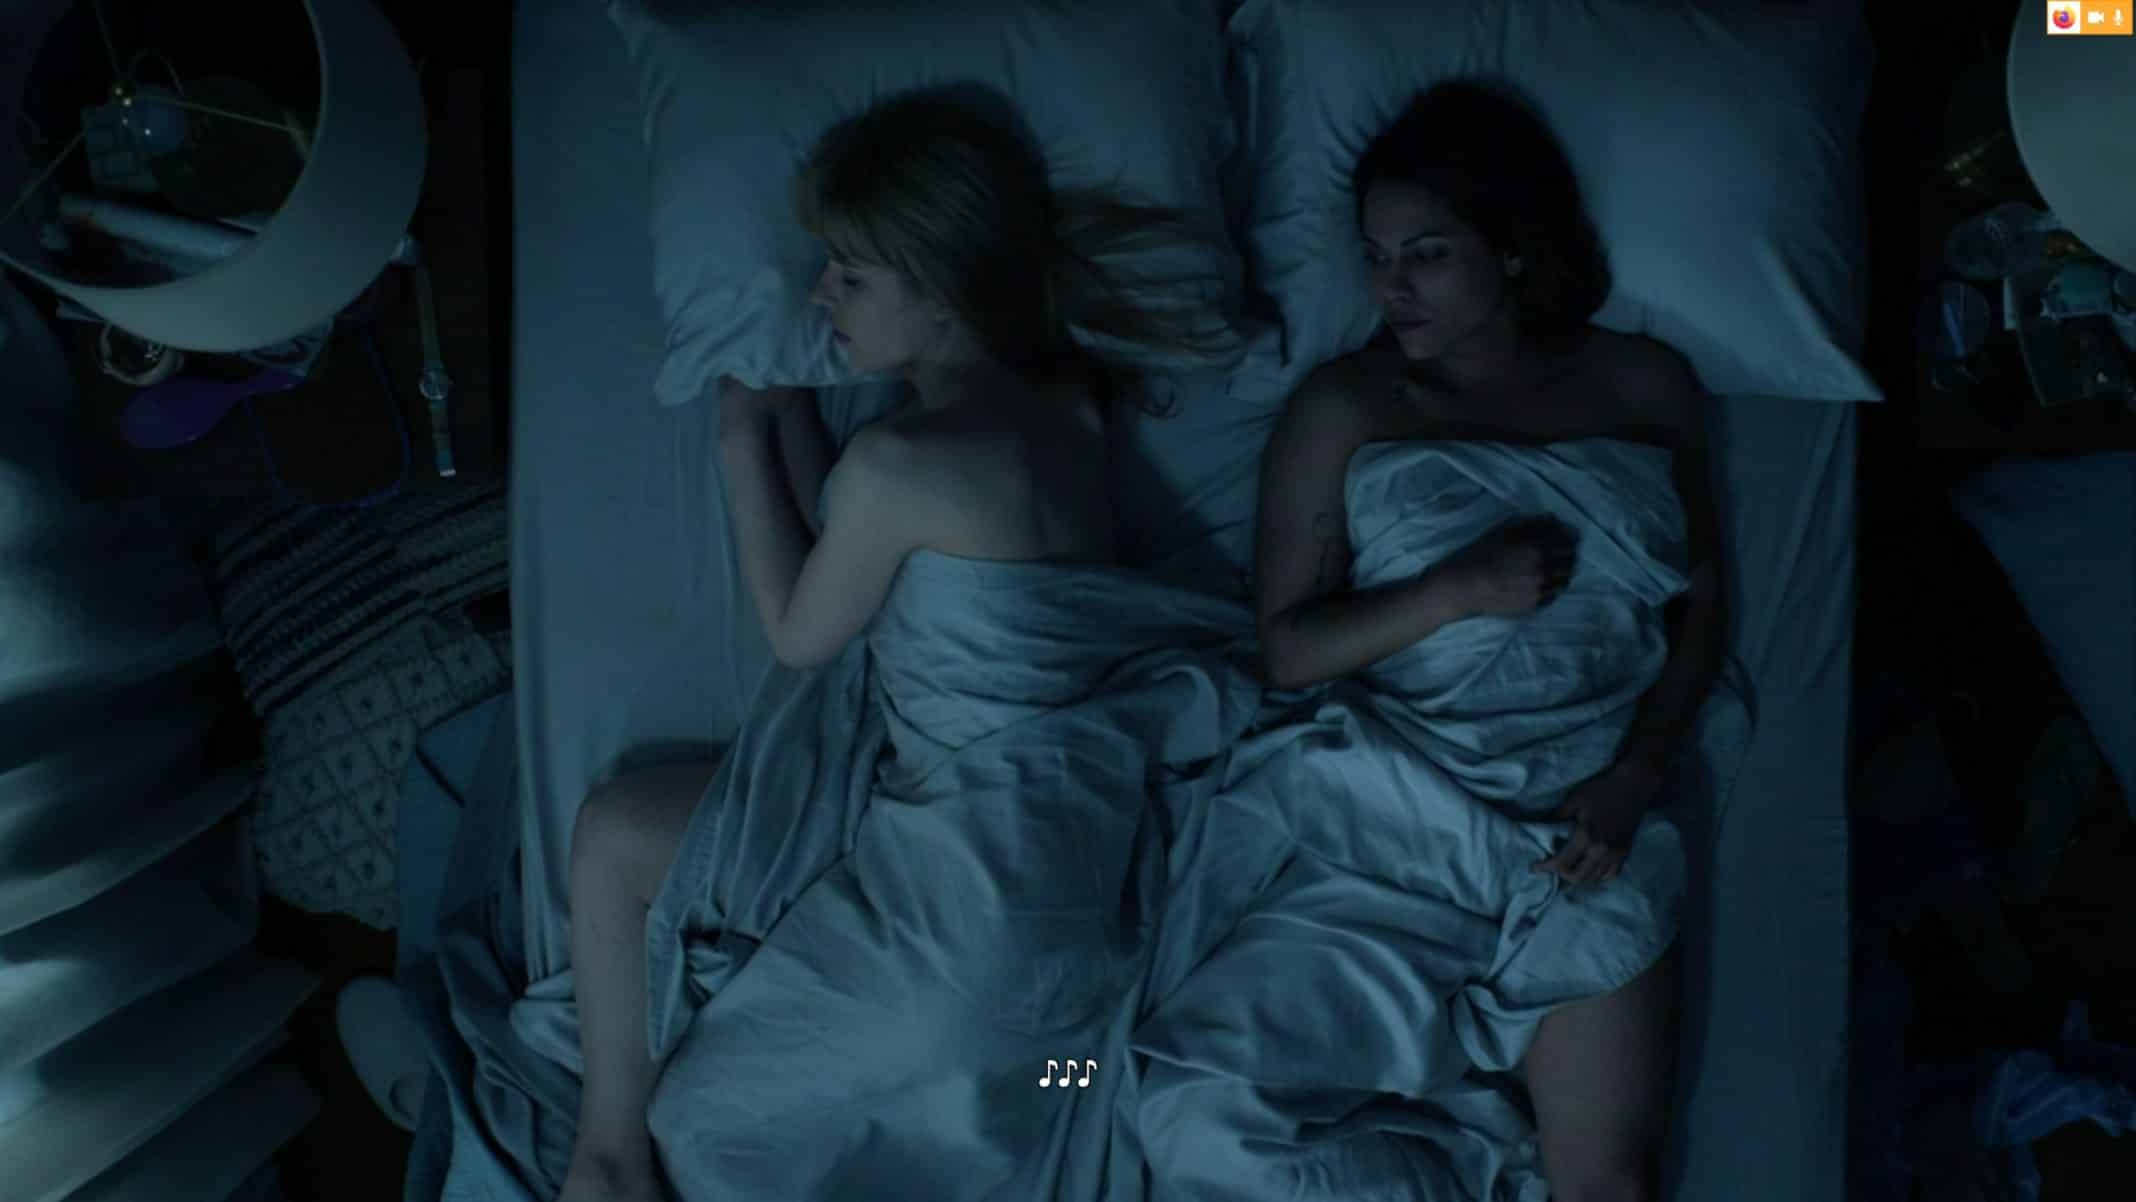 Devonne and Jackie in bed together.